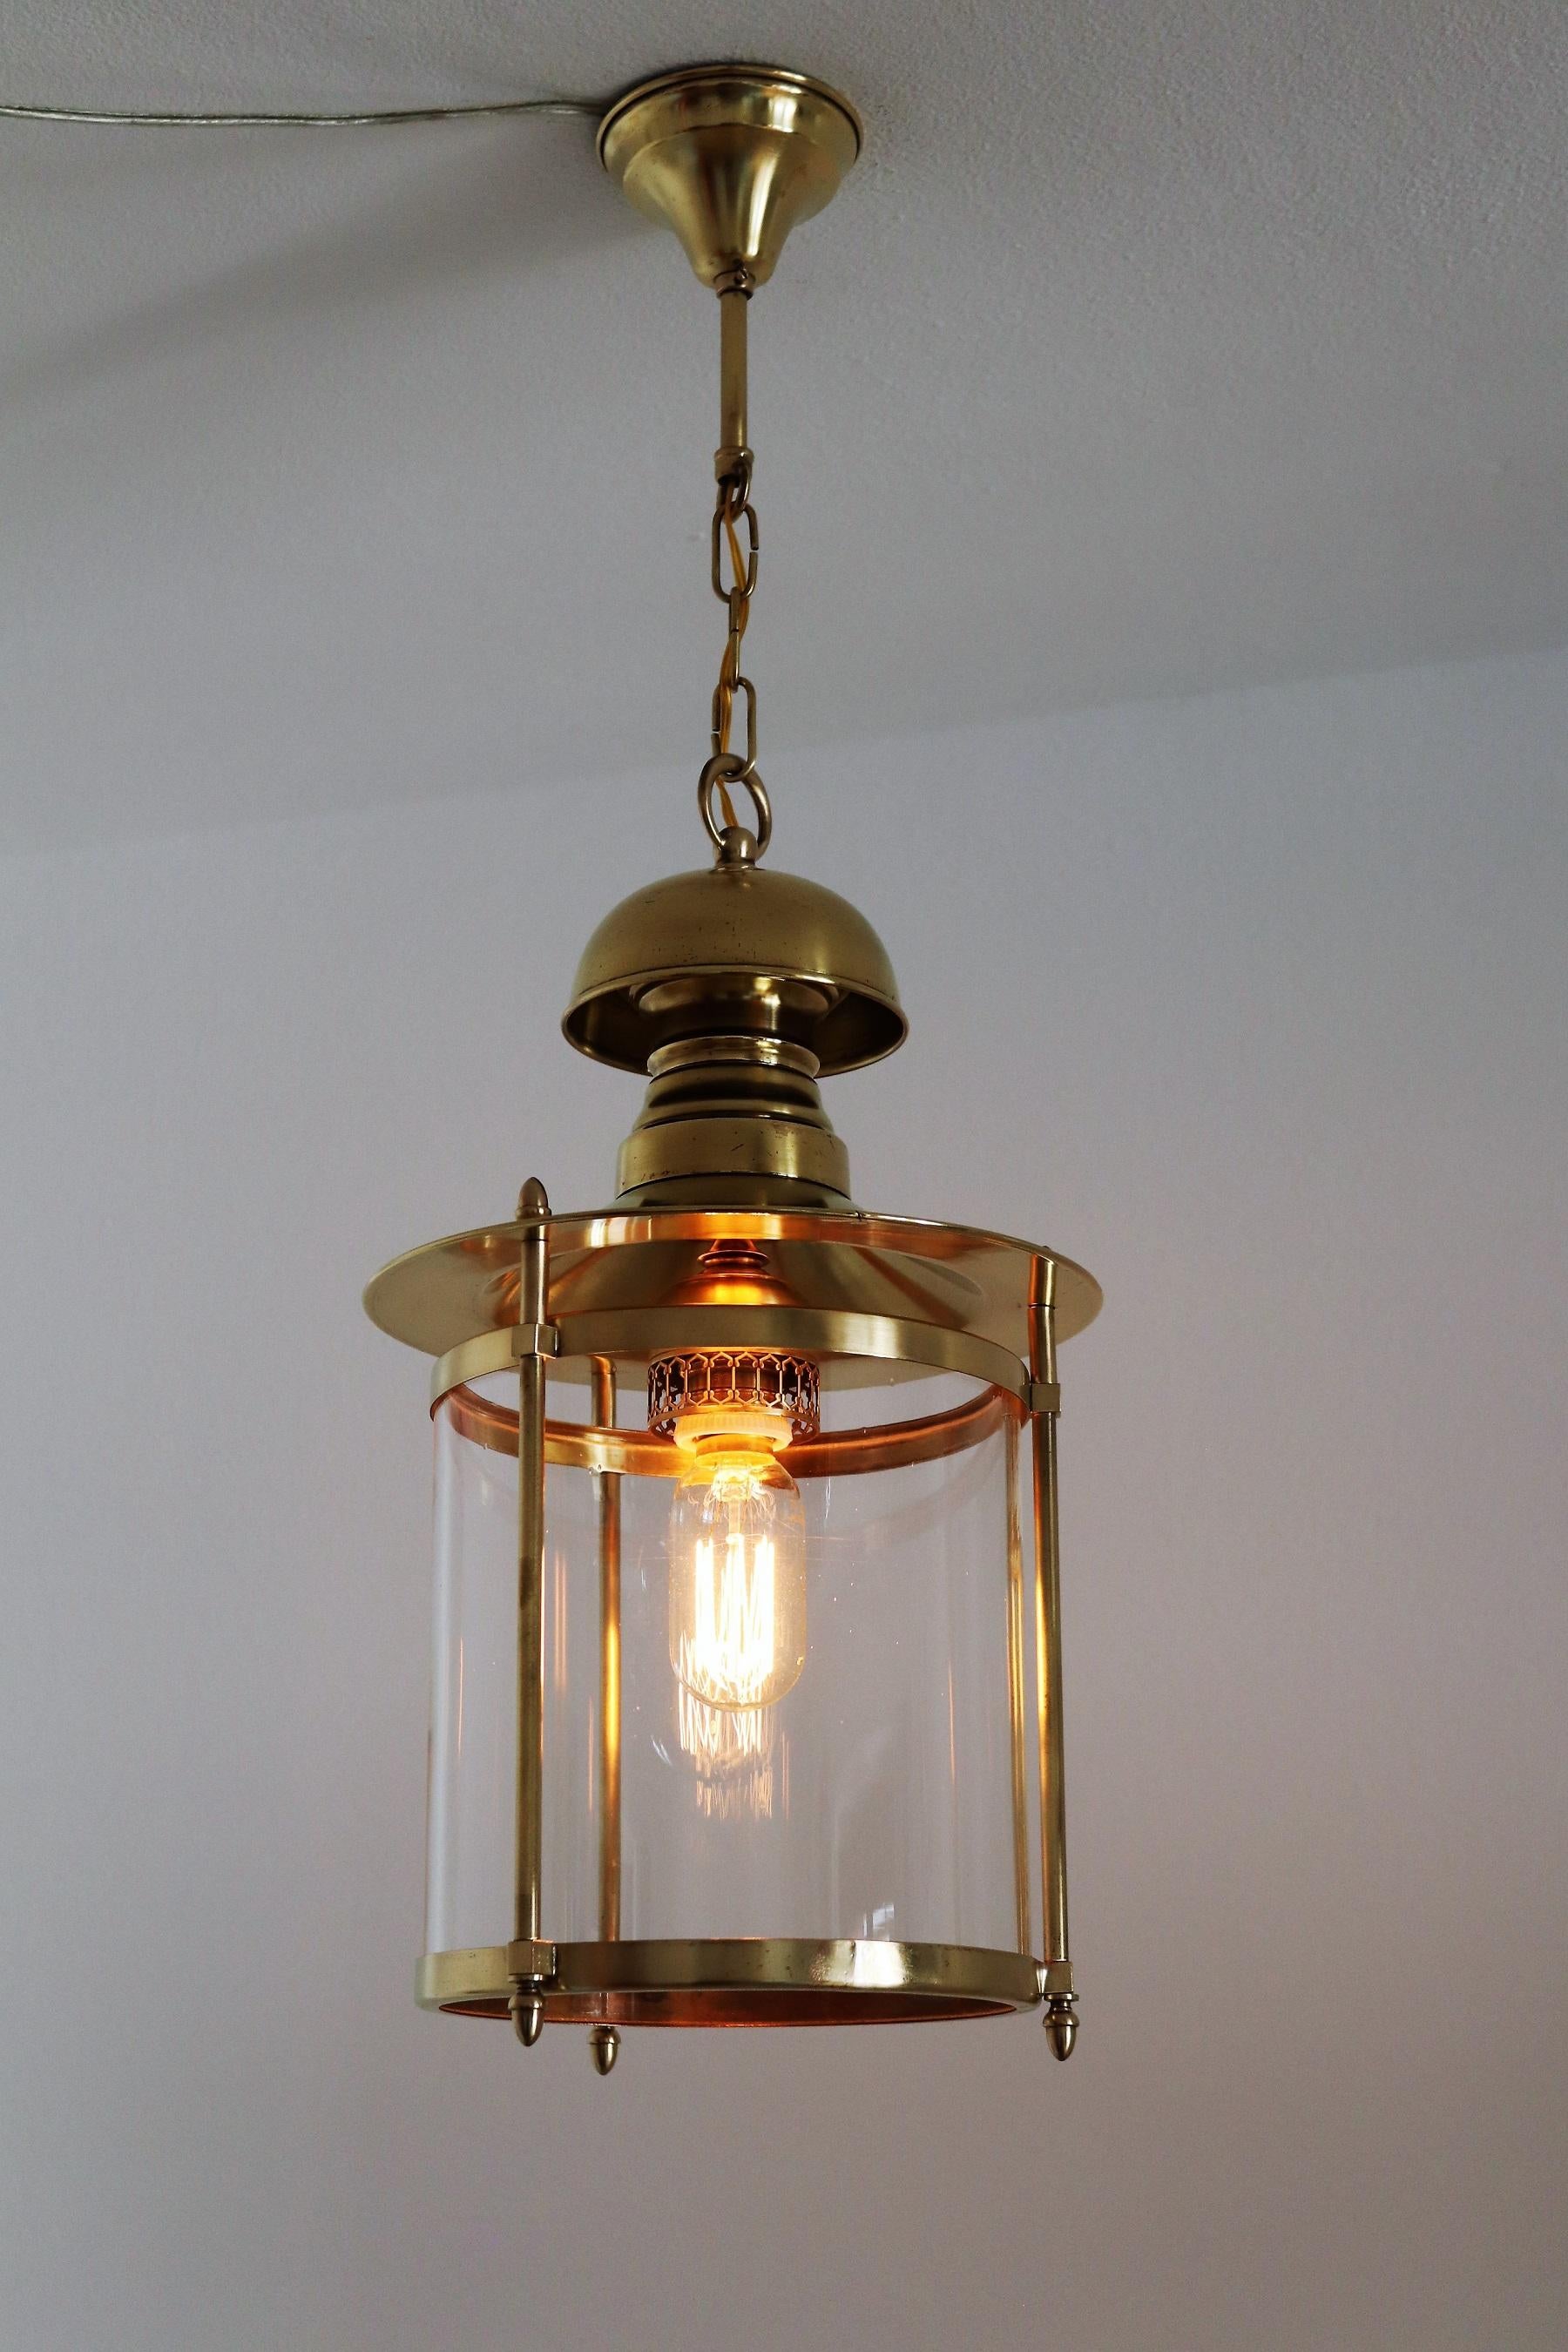 Italian Midcentury Brass and Glass Pendant Lamp or Lantern, 1970s For Sale 3